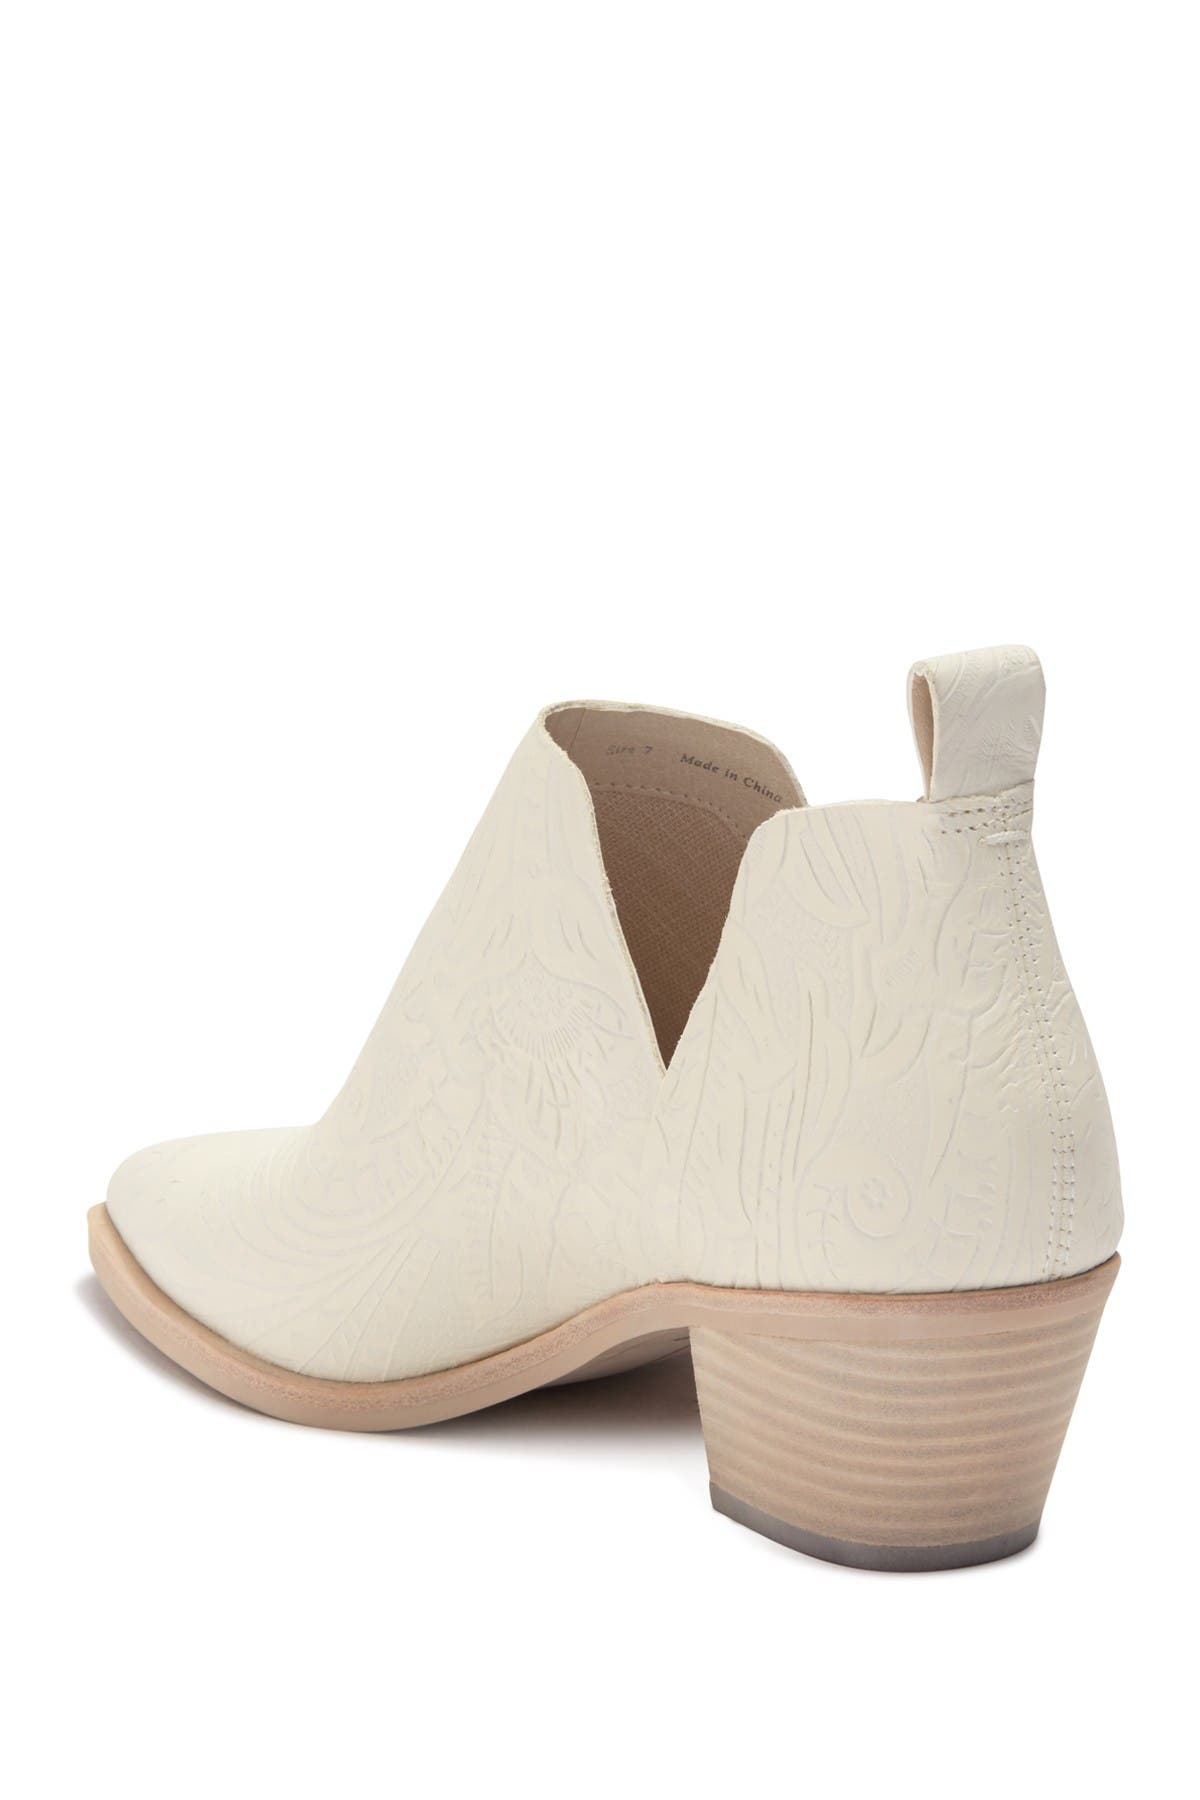 Dolce Vita | Sonni Pointy Toe Bootie | Nordstrom Rack